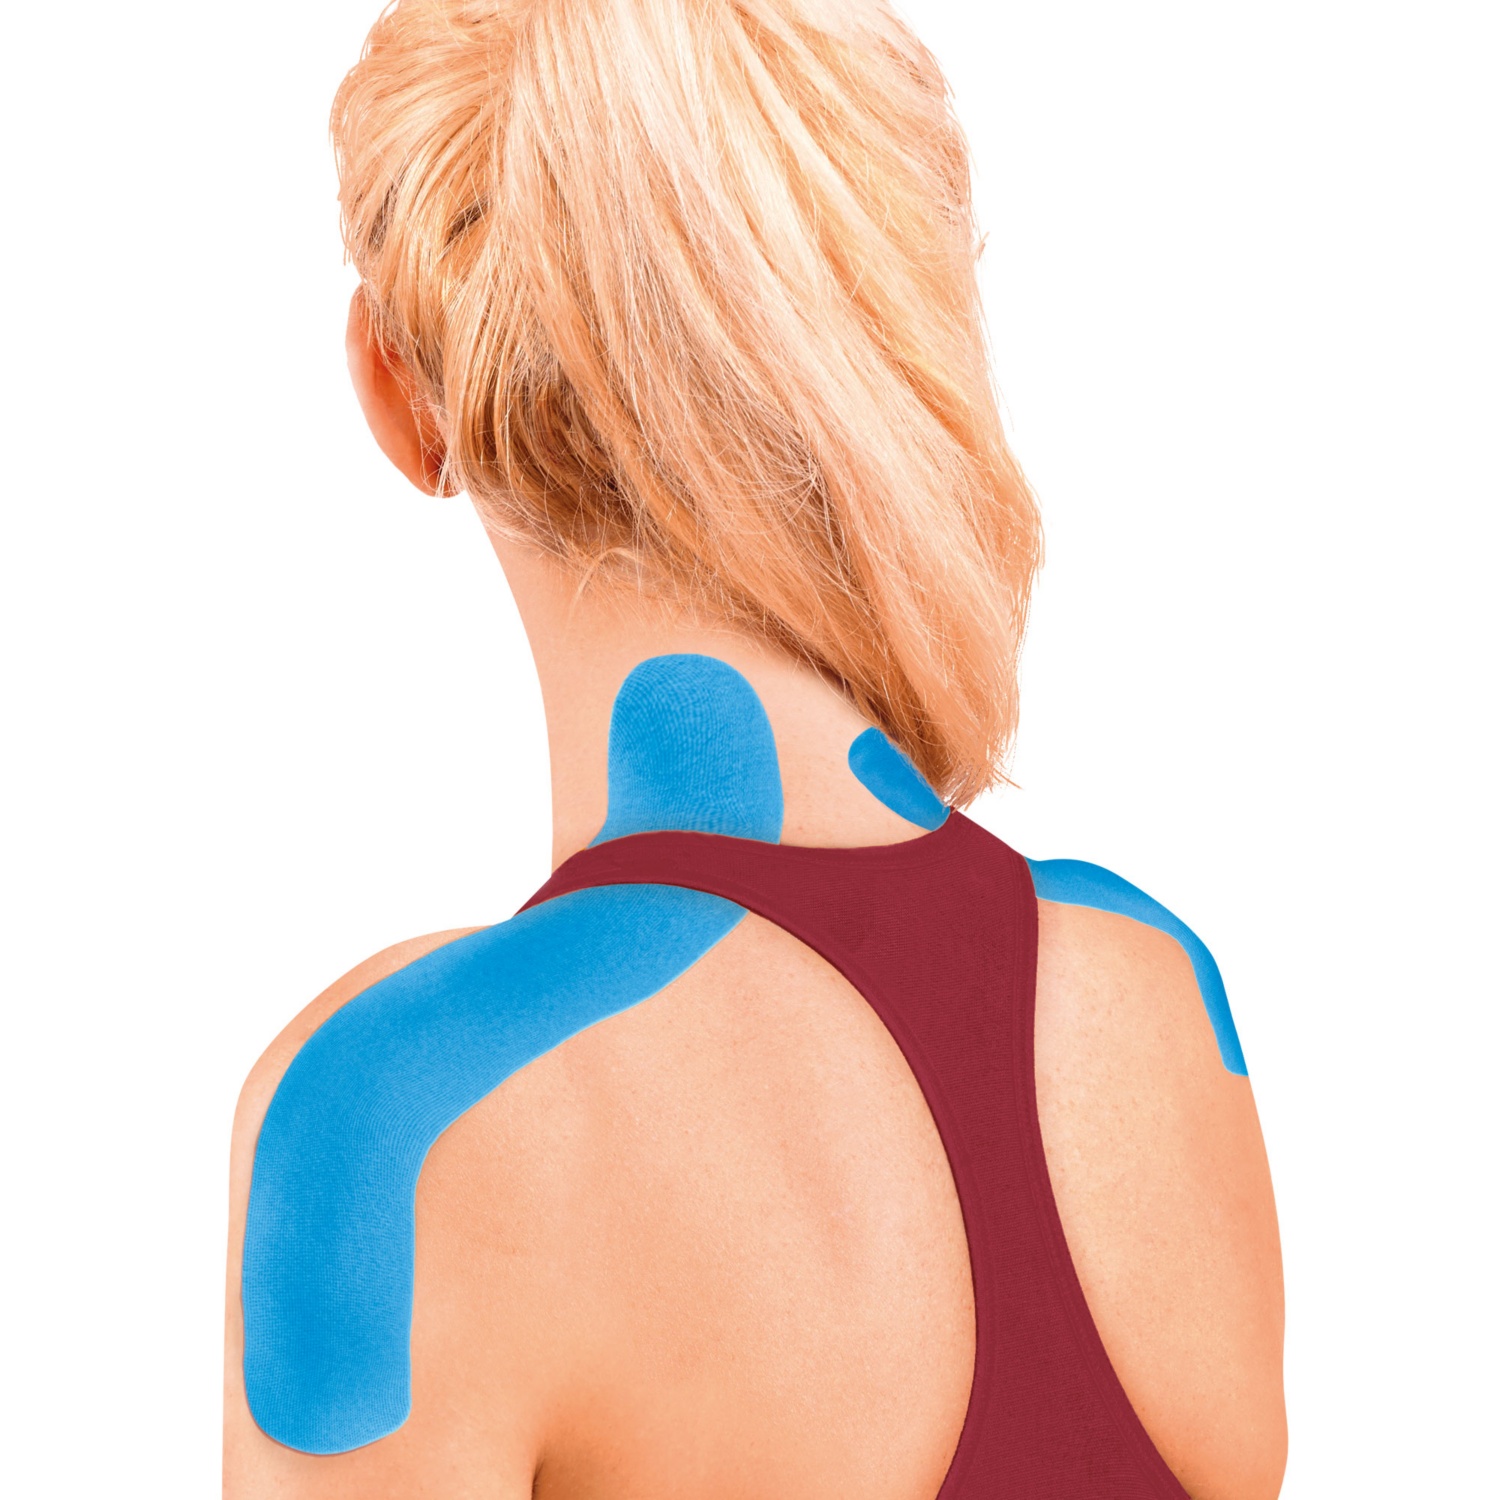 ACTIVE MED Kinesiology Tape